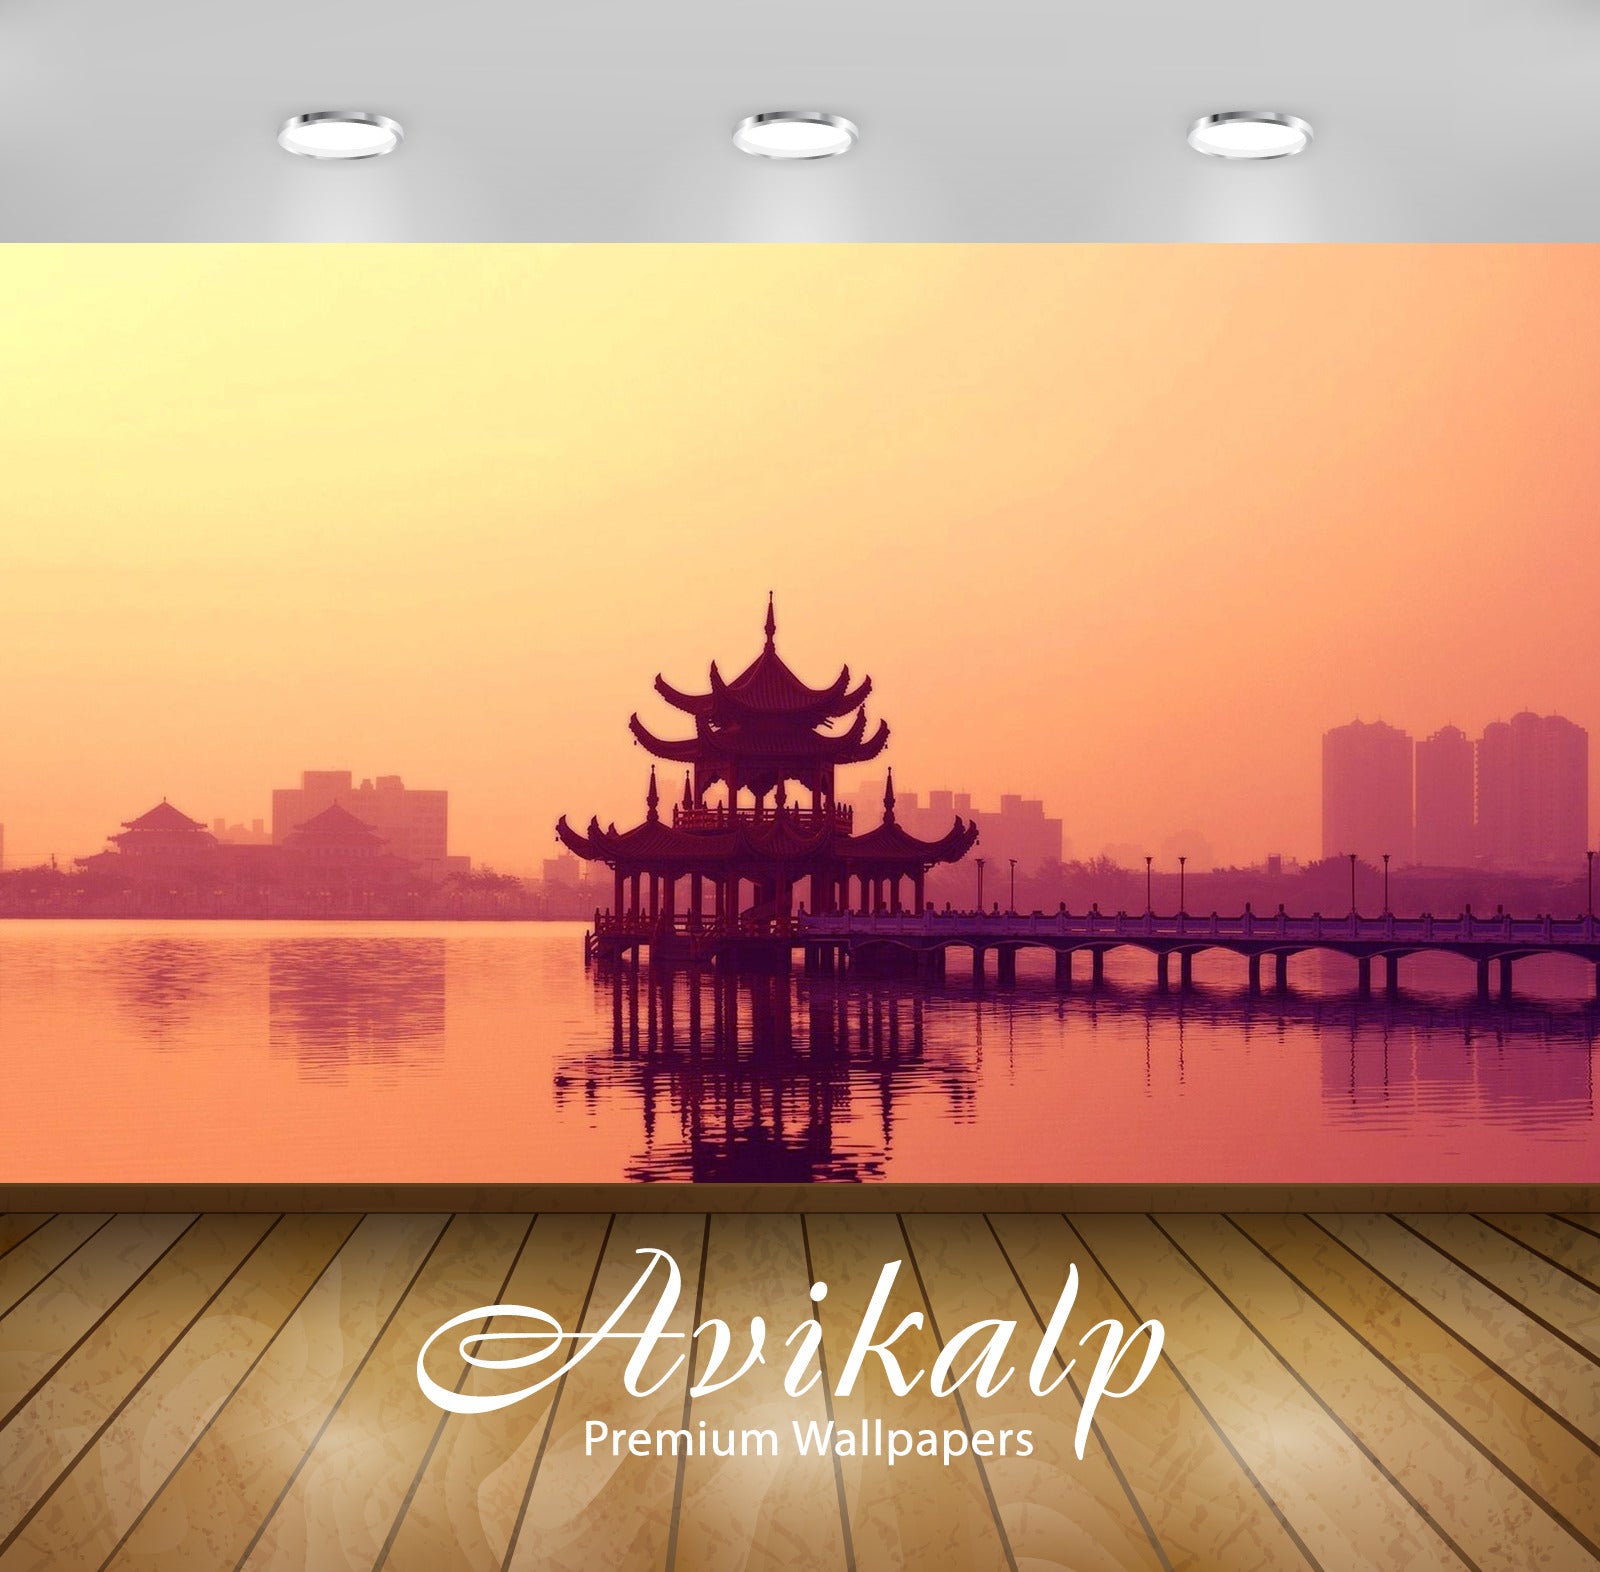 Avikalp Exclusive Awi1594 Pier China Full HD Wallpapers for Living room, Hall, Kids Room, Kitchen, T